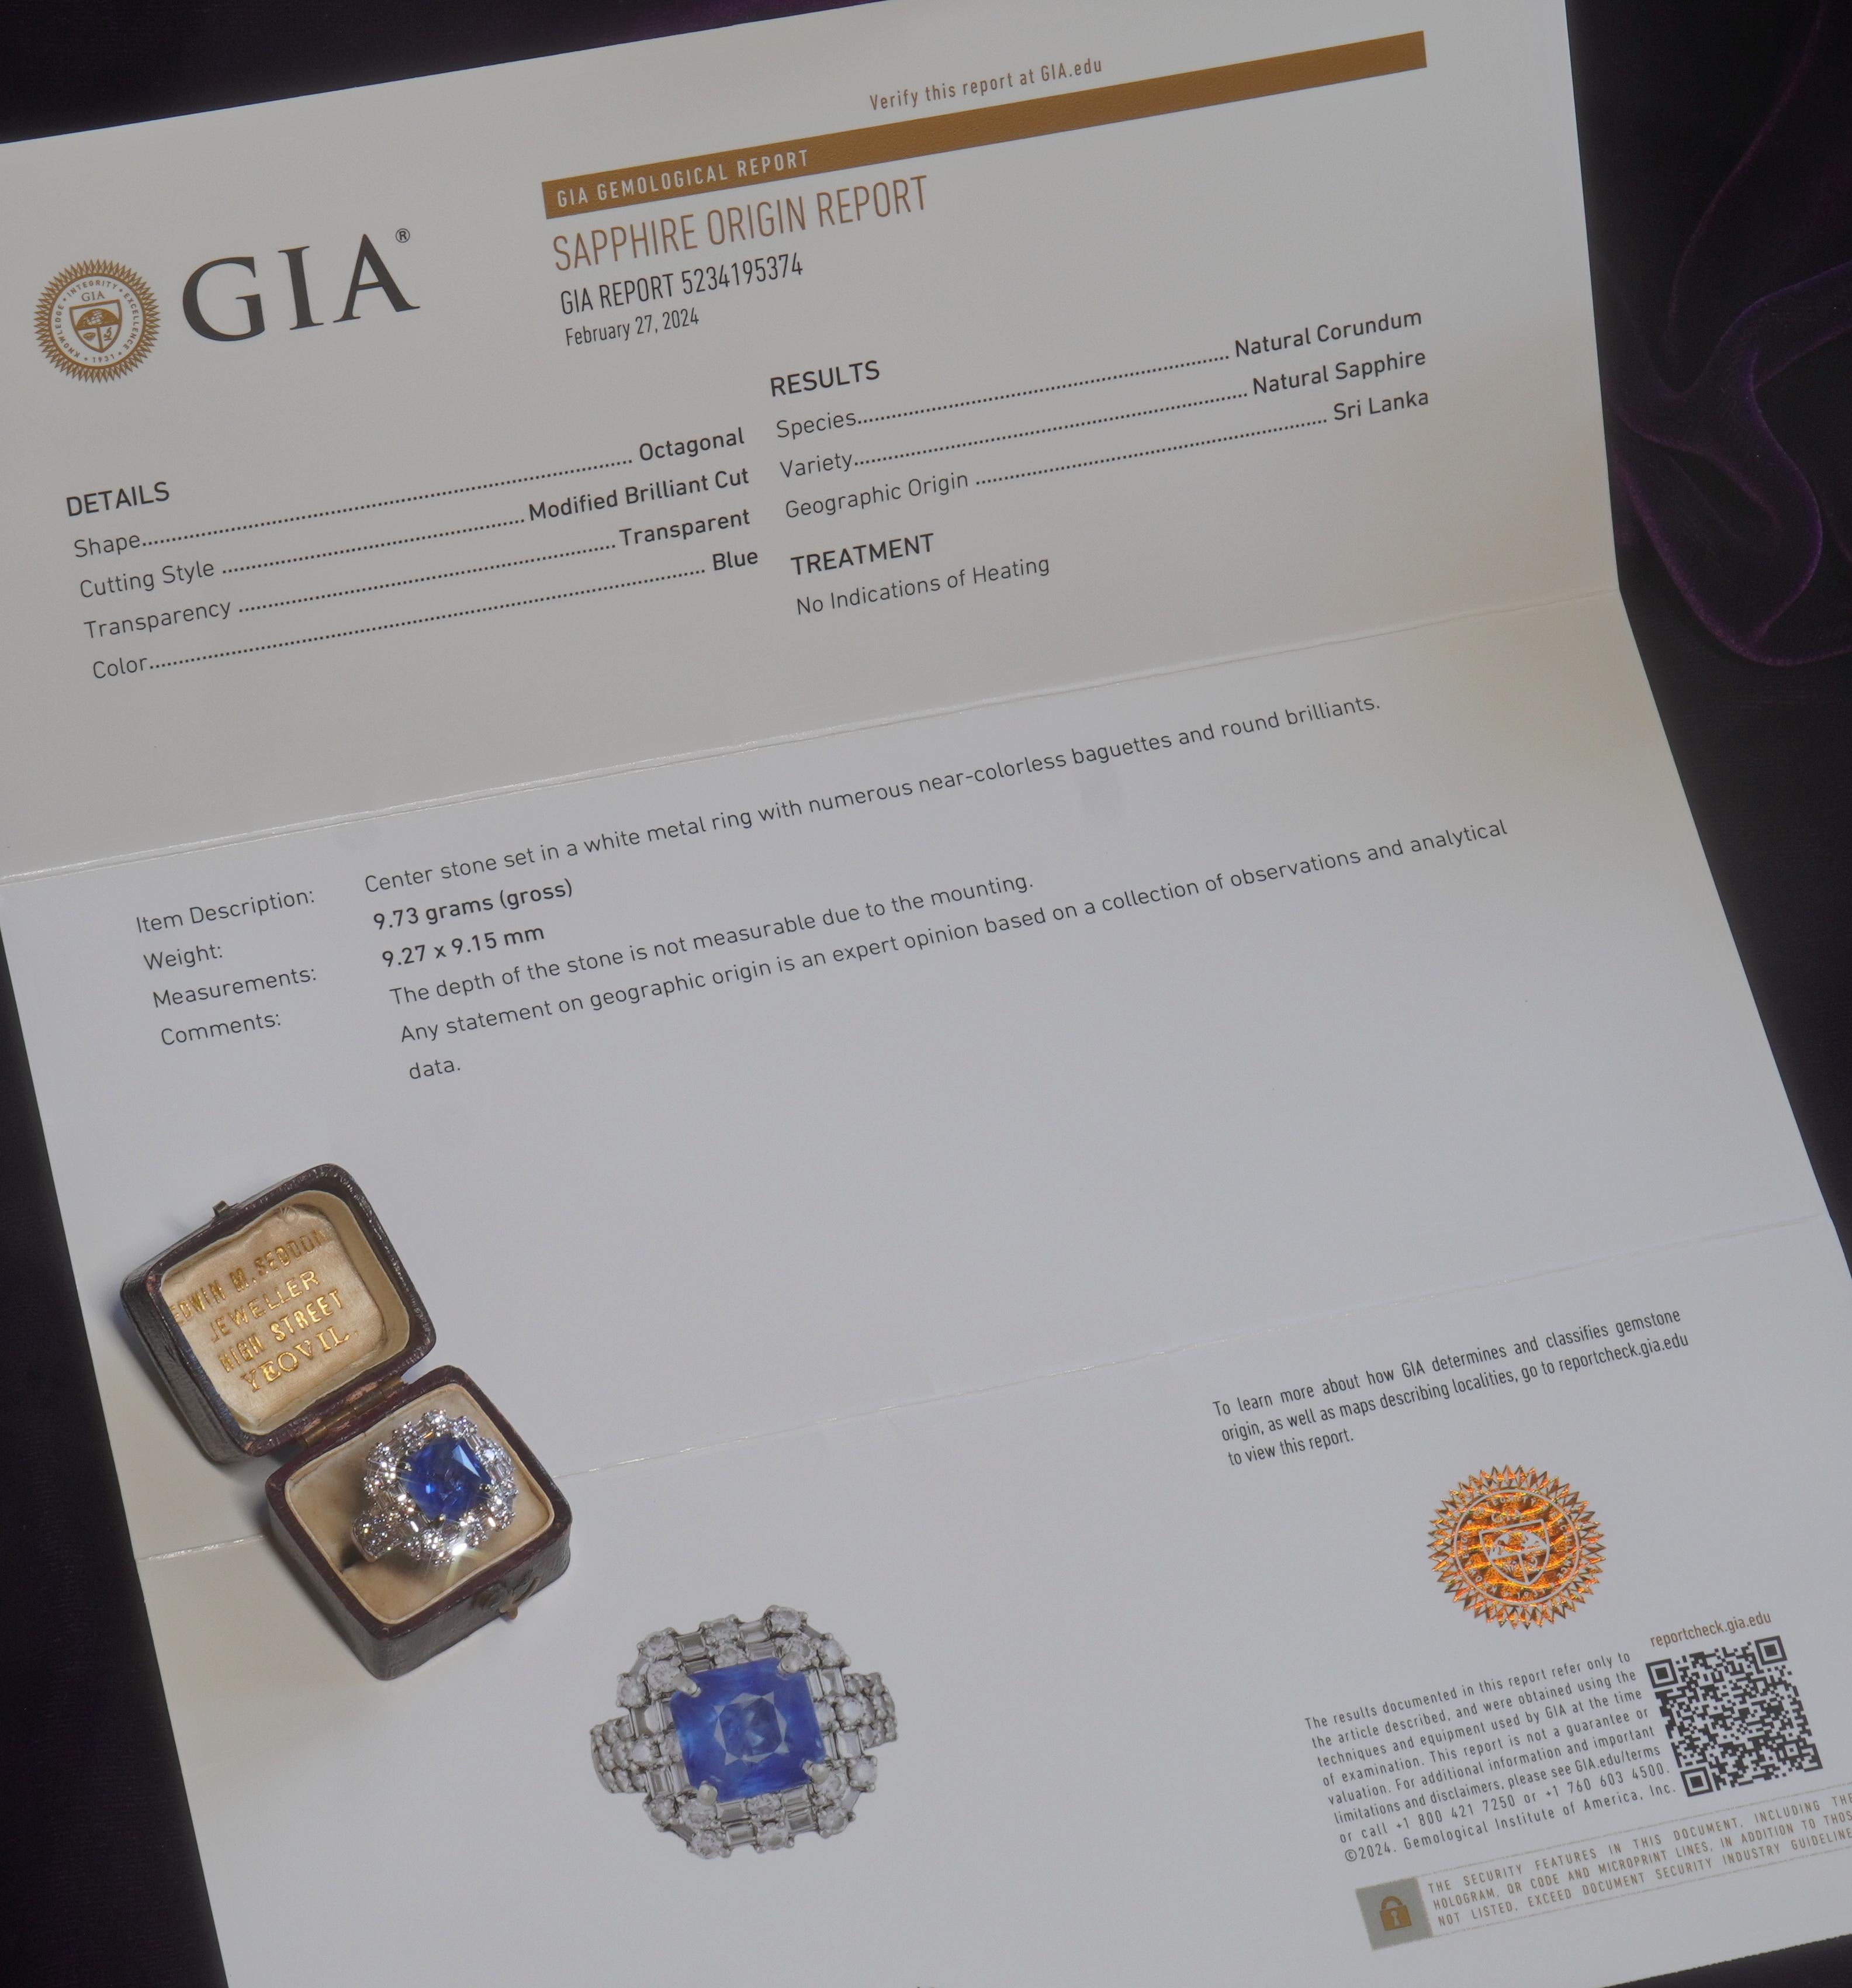 Old South Jewels proudly presents... VINTAGE LUXURY.   GIA CERTIFIED 18K GOLD HUGE 9.34 CARAT UNHEATED SAPPHIRE DIAMOND RING & BOX!   HUGE 7.03 CARAT BRILLIANT ROYAL BLUE GIA CERTIFIED RARE NO HEAT NATURAL SAPPHIRE.   This Gorgeous Sapphire Is